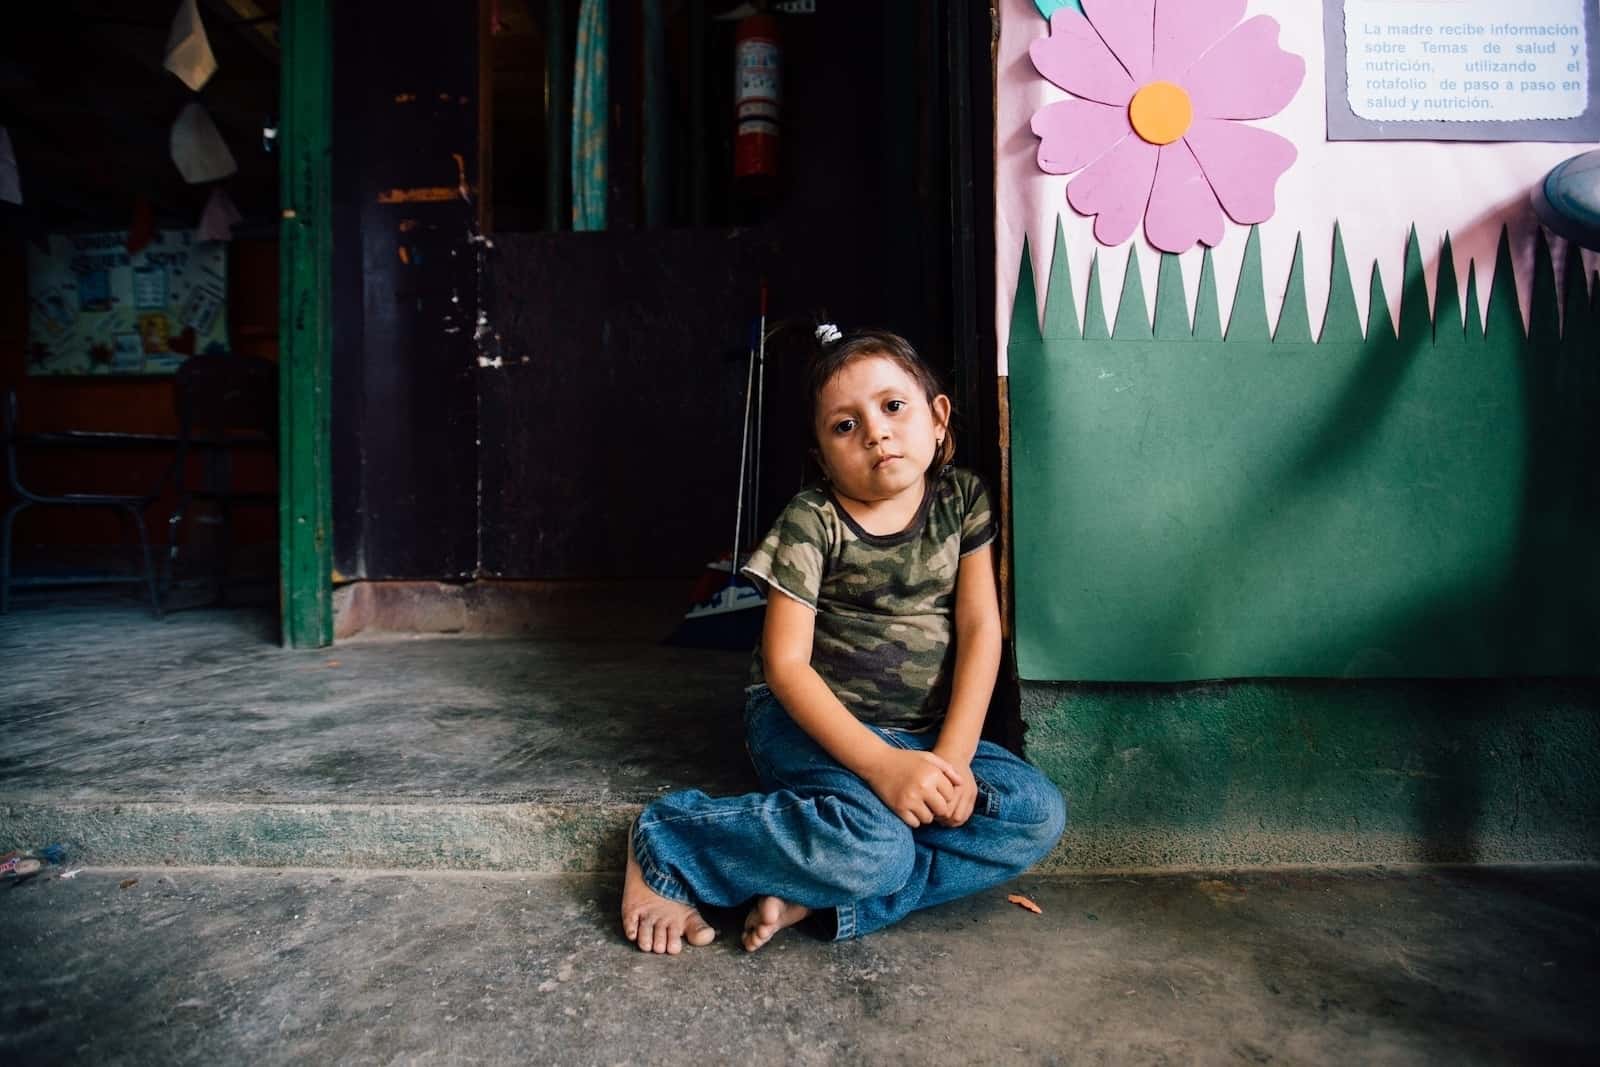 A little girl wearing a camouflage shirt, jeans and bare feet, sits on a concrete step, looking sad.